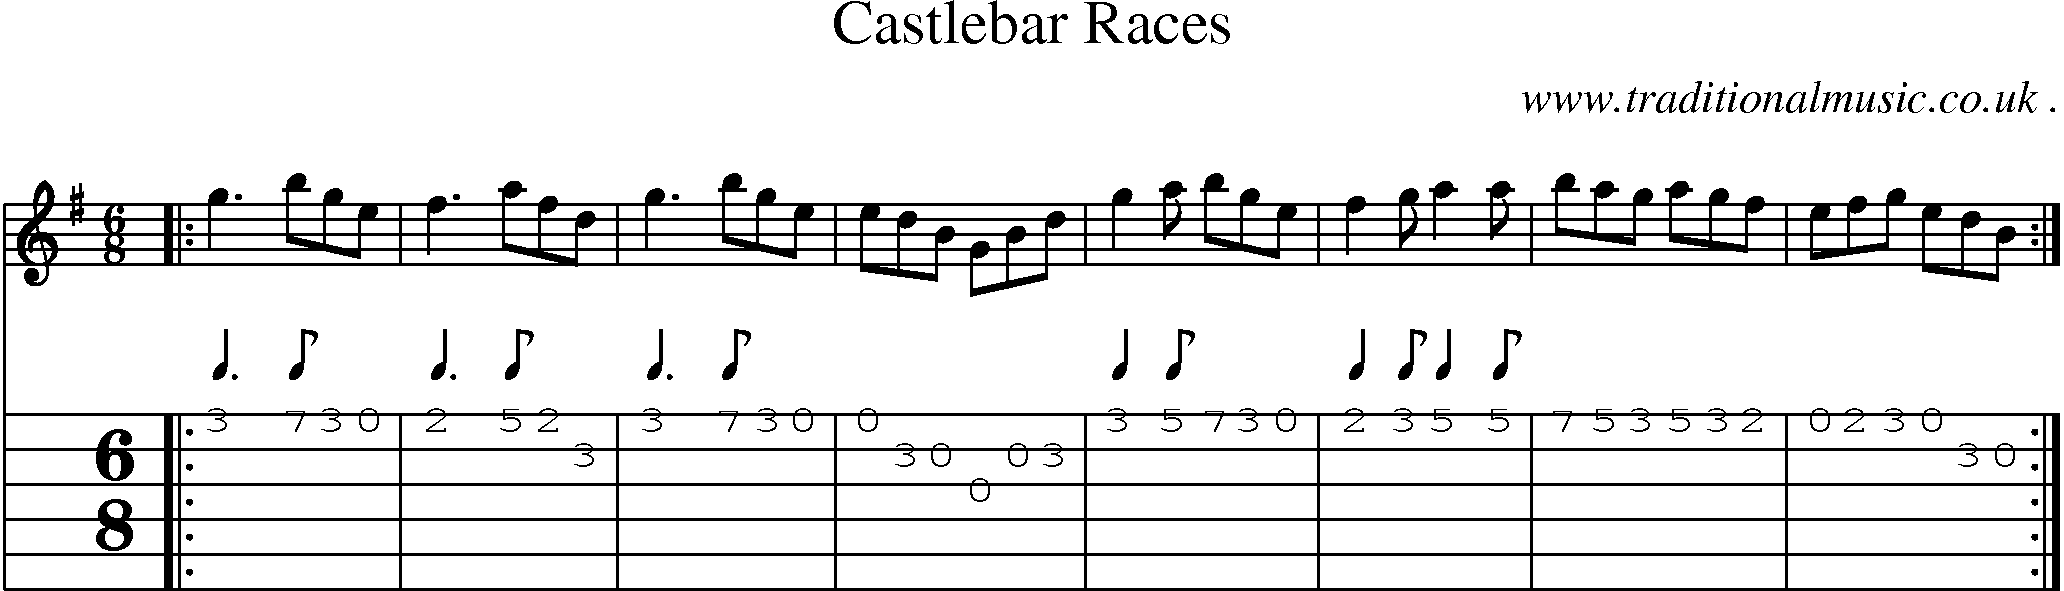 Sheet-Music and Guitar Tabs for Castlebar Races